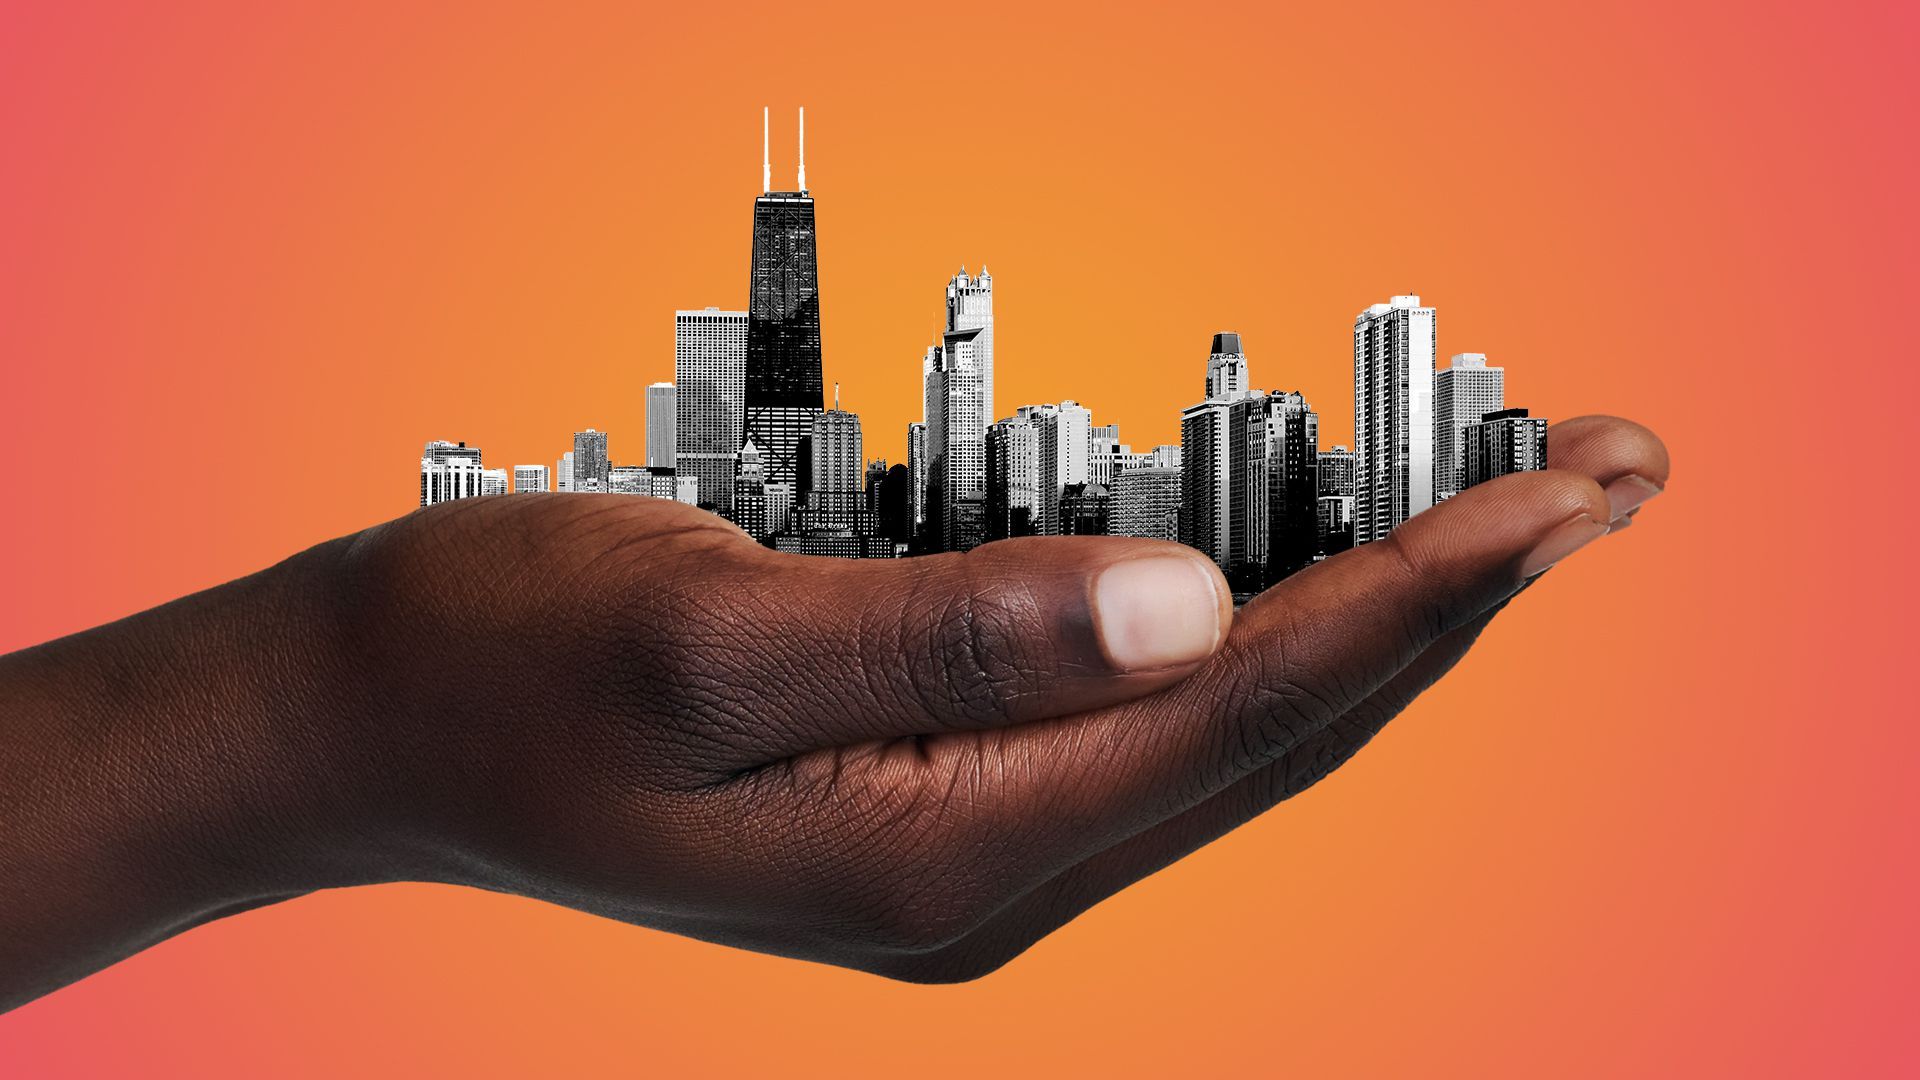 Illustration of a Black woman's hands holding the city of Chicago.